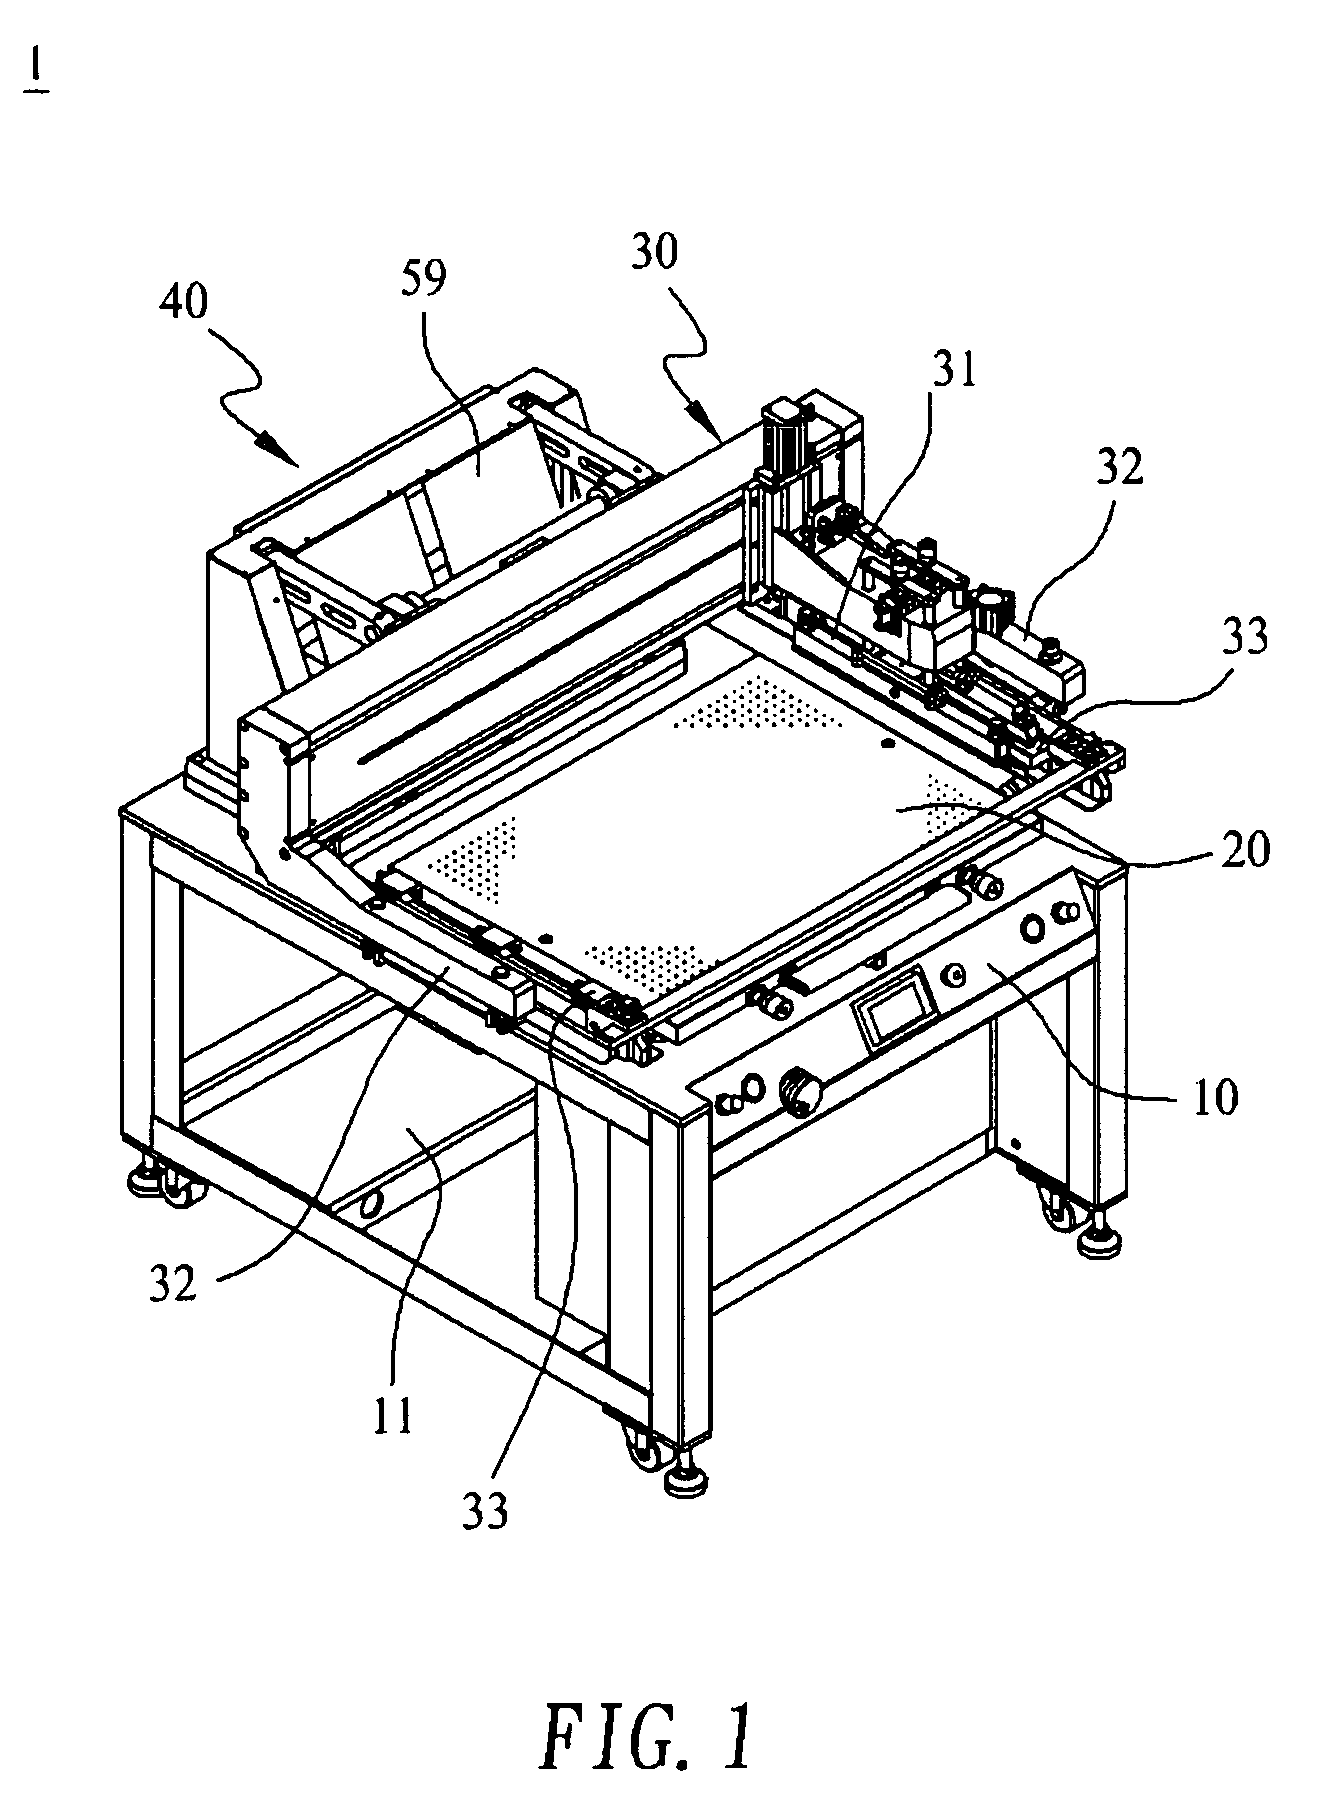 Two-bar linkage fast elevating apparatus for screen printing machine